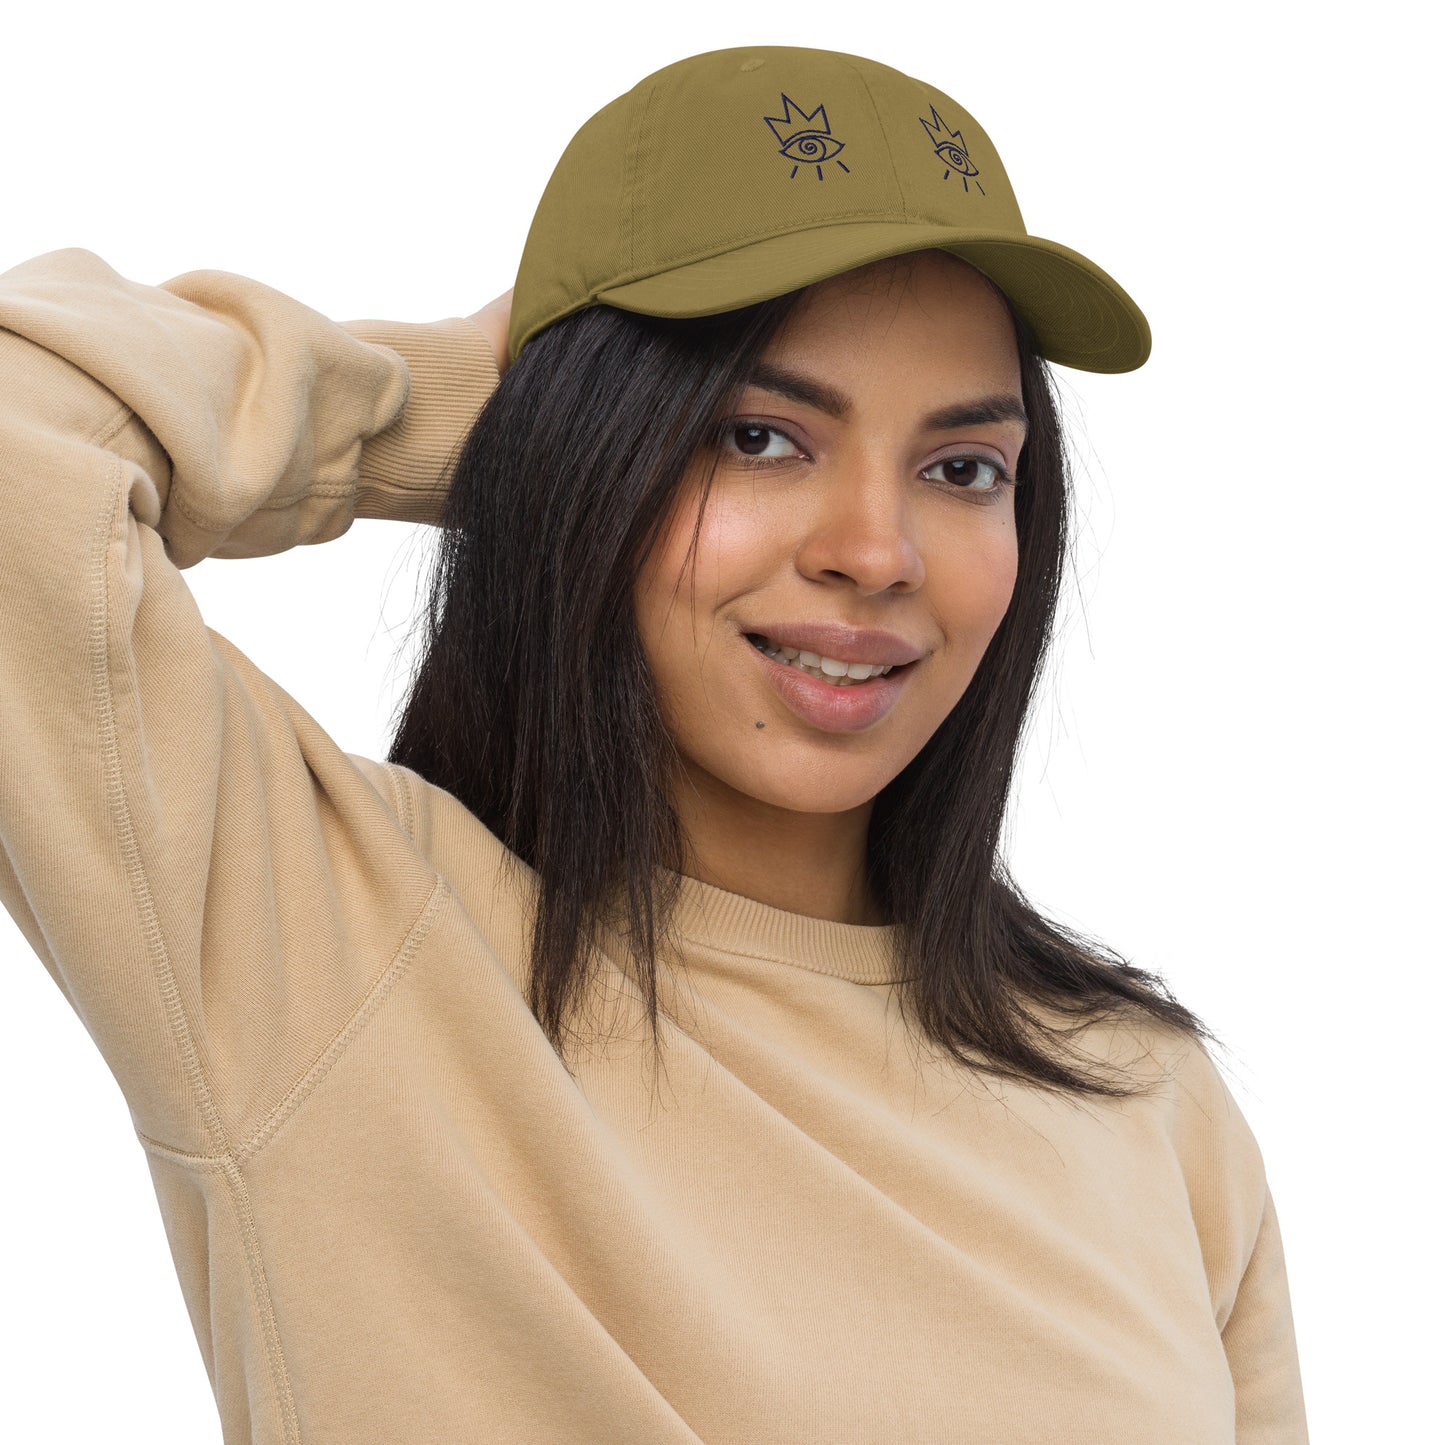 I See You - organic cotton dad hat